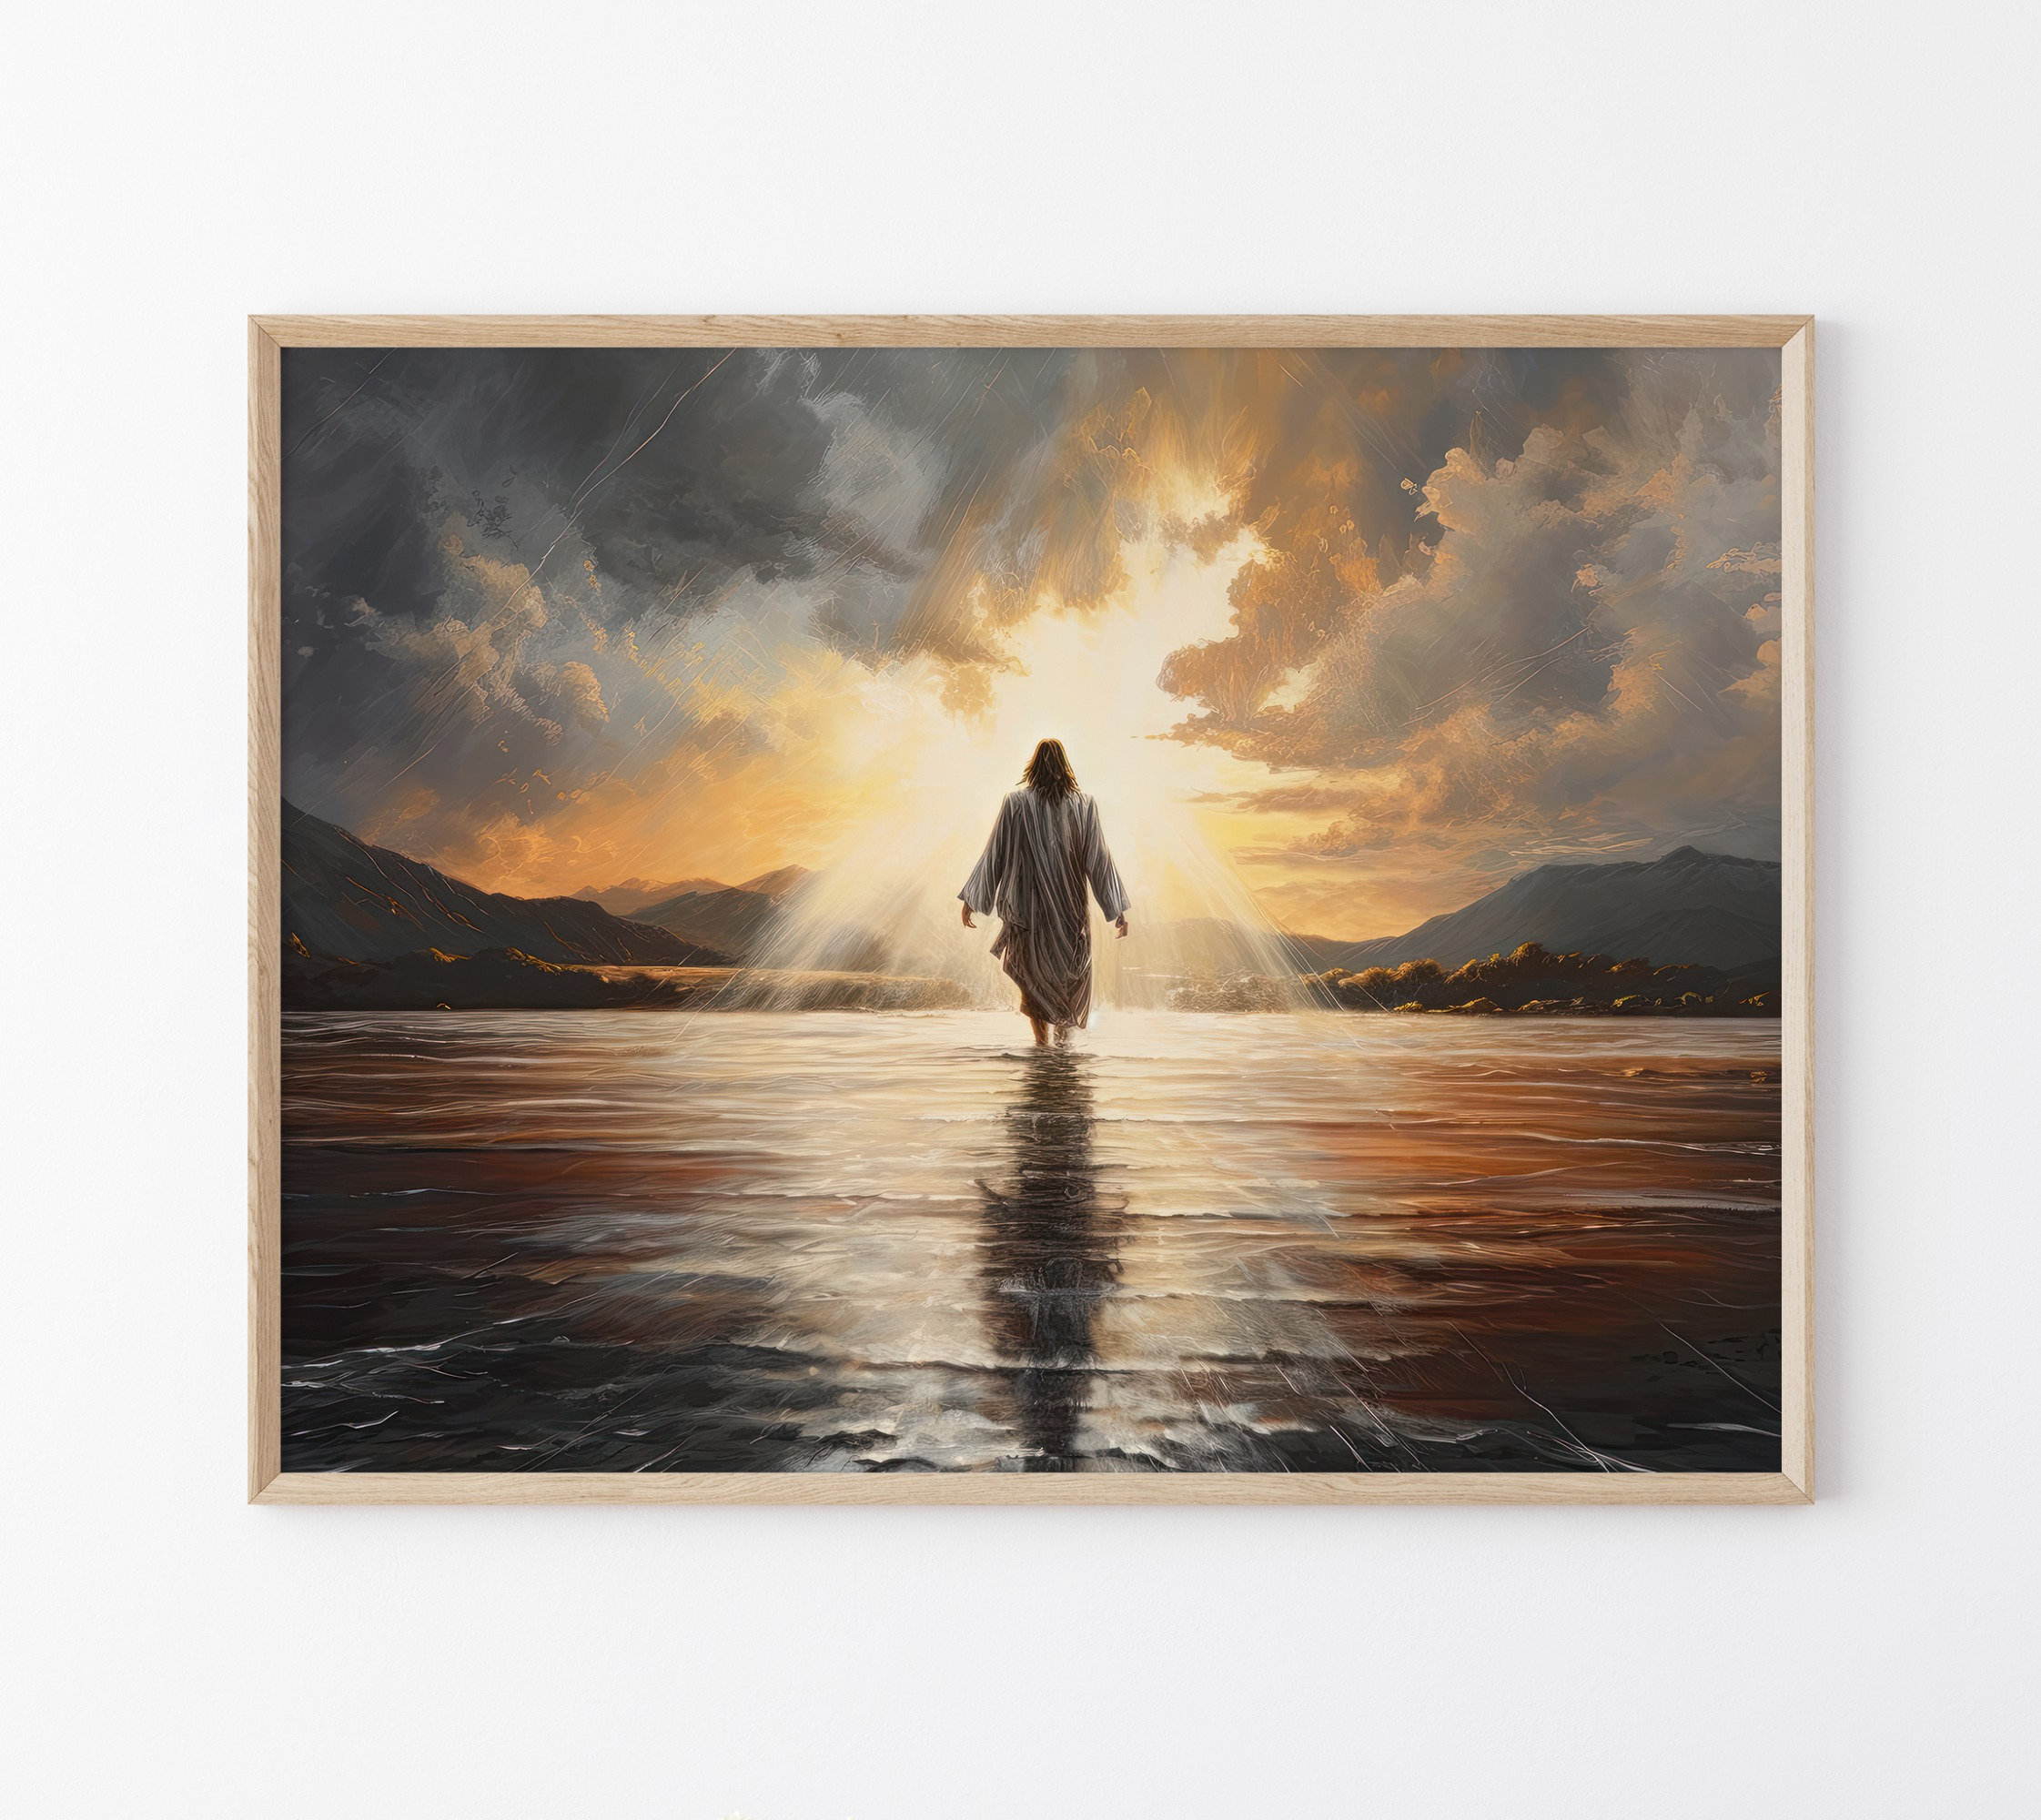 Jesus Christ Walking on Water Print Decor, Christian Art, Art Religious Clouds Wall Original Etsy Wall Holy Print, Oil Painting, Matte Religious 